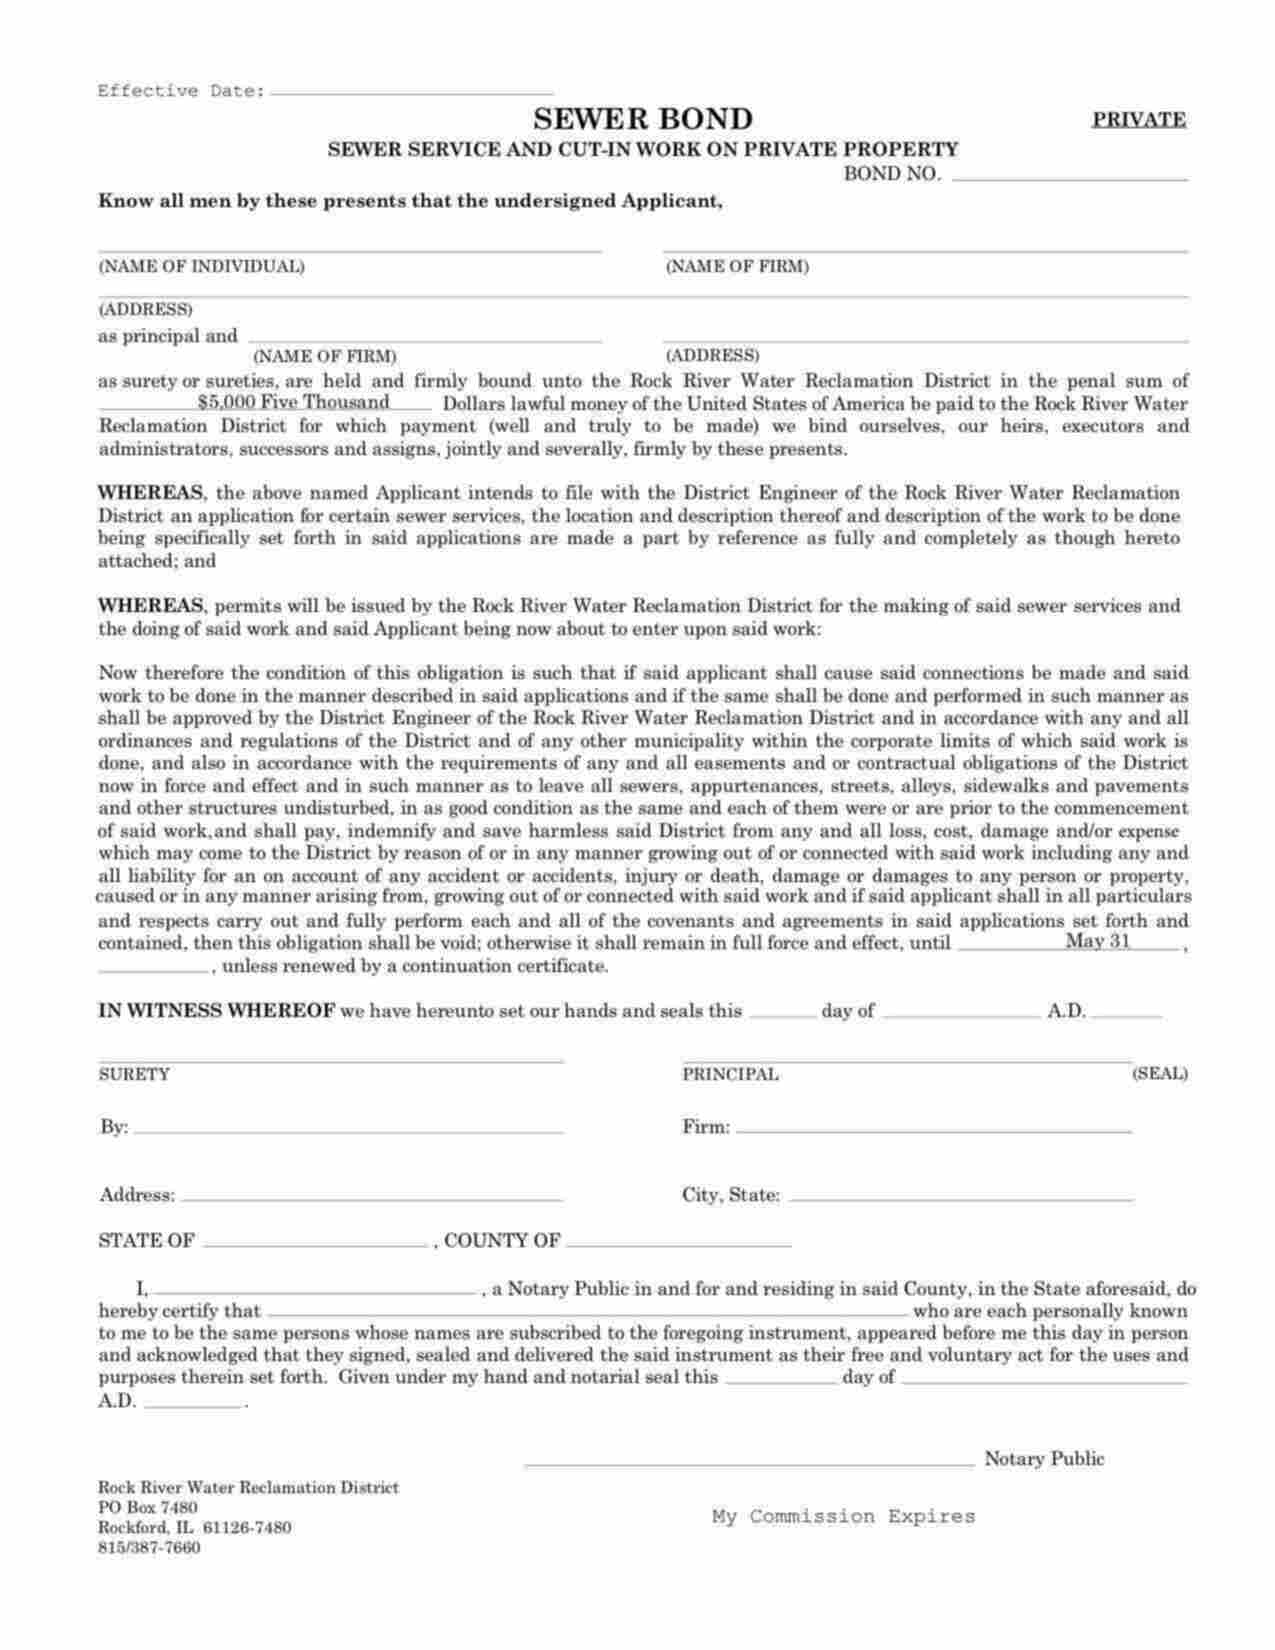 Illinois Sewer Service and Cut-in Work on Private Property Bond Form